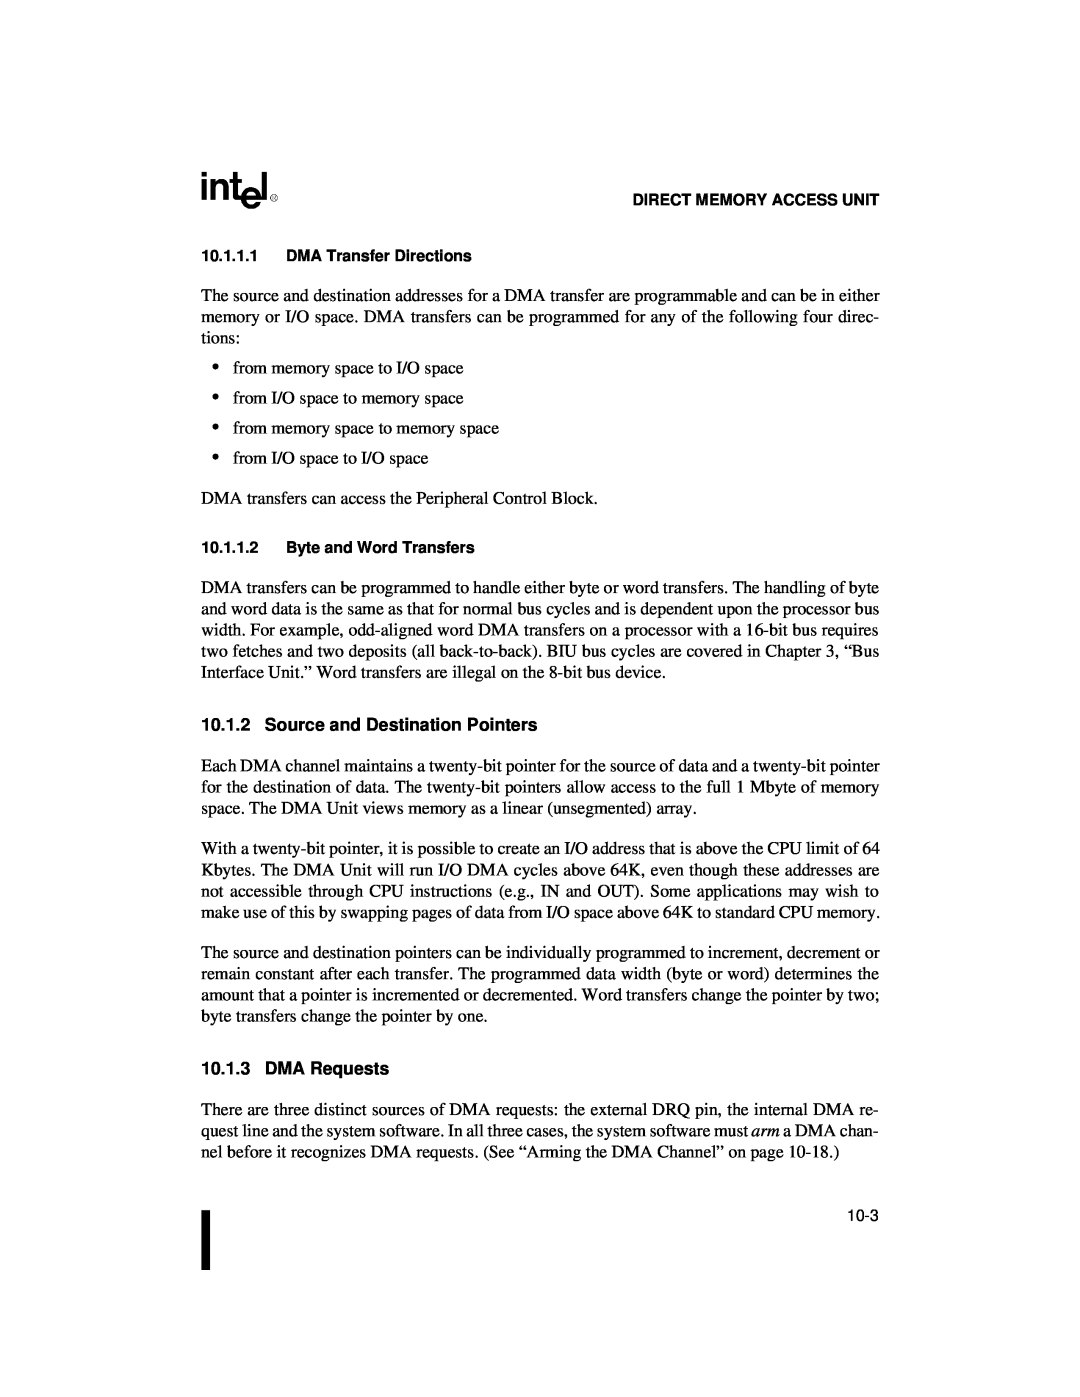 Intel 80C188XL, 80C186XL user manual Source and Destination Pointers, DMA Requests 